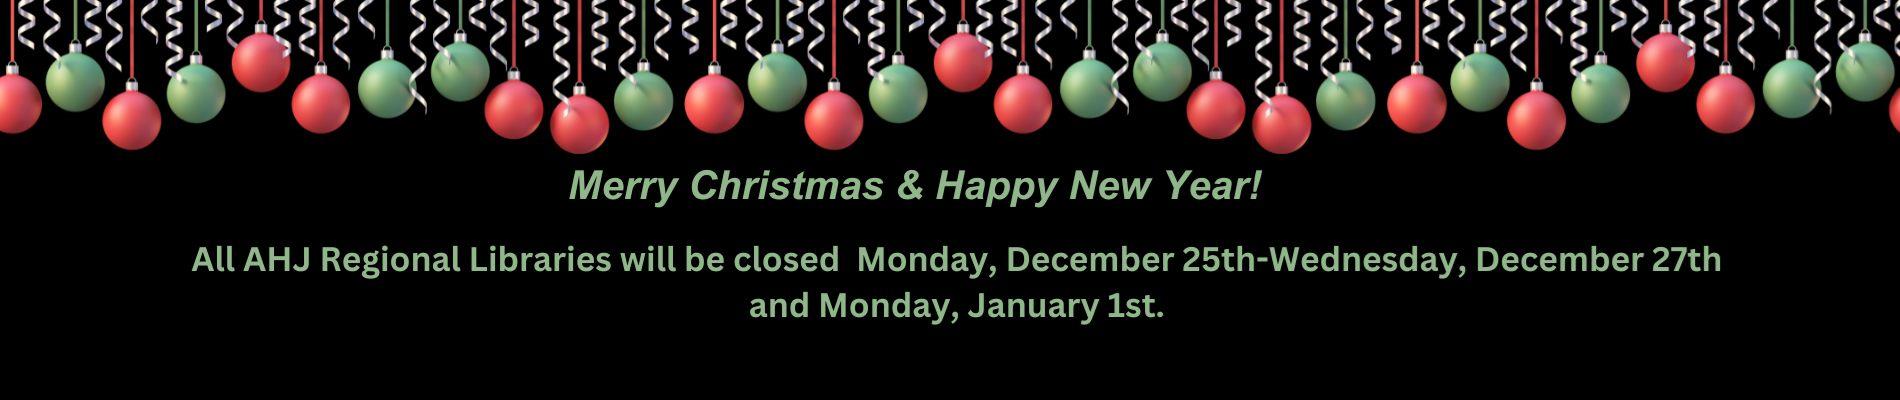 Merry Christmas & Happy New Year! All AHJ Regional Libraries will be closed  Monday, December 25th-Wednesday, December 27th and Monday, January 1st.